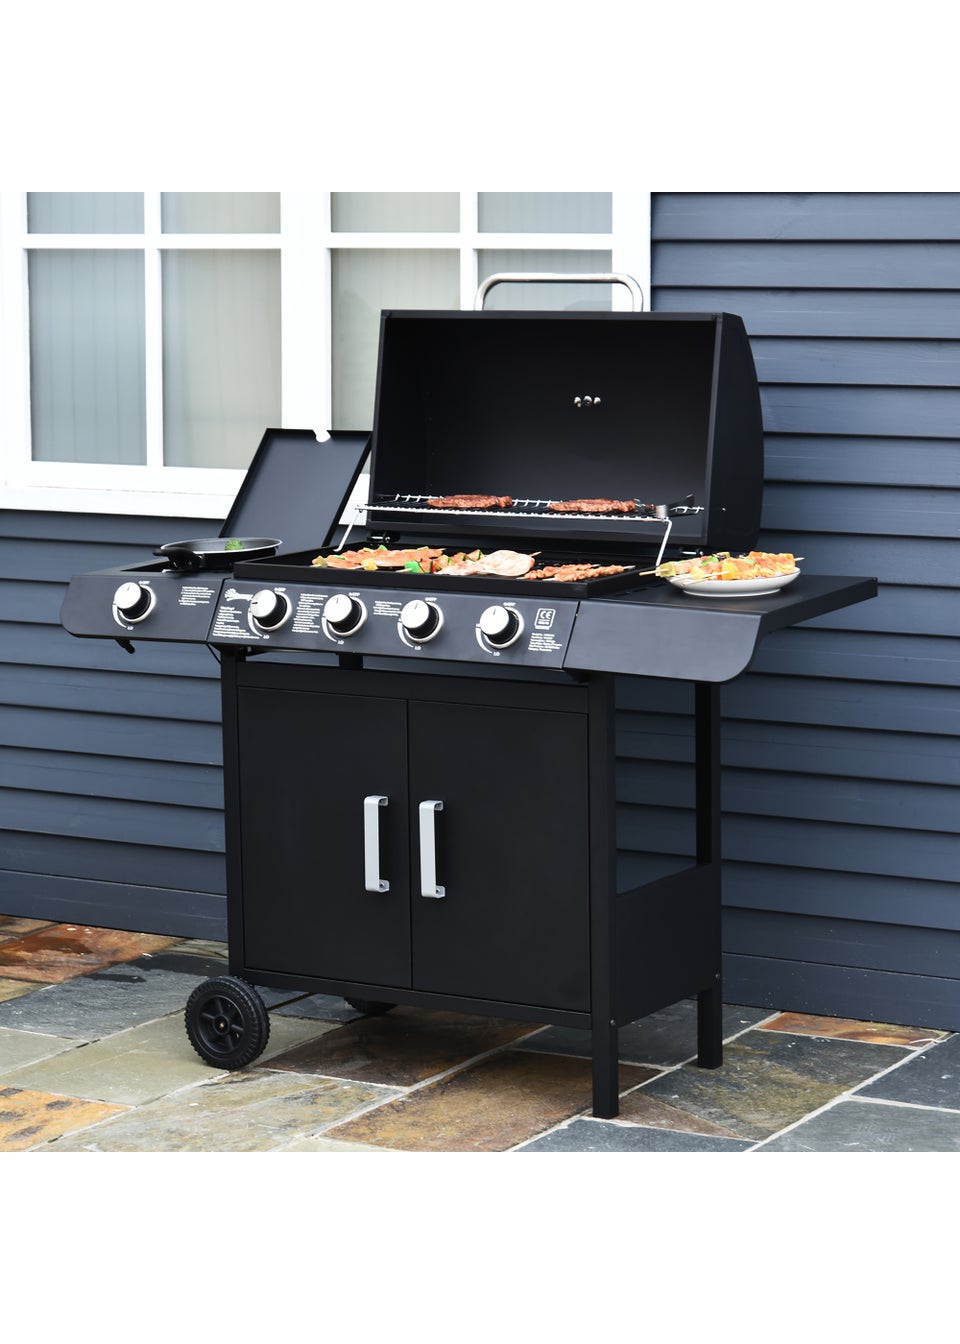 Outsunny Steel 4+1 Gas Barbecue Grill with Wheels (125cm x 51cm x 100cm)